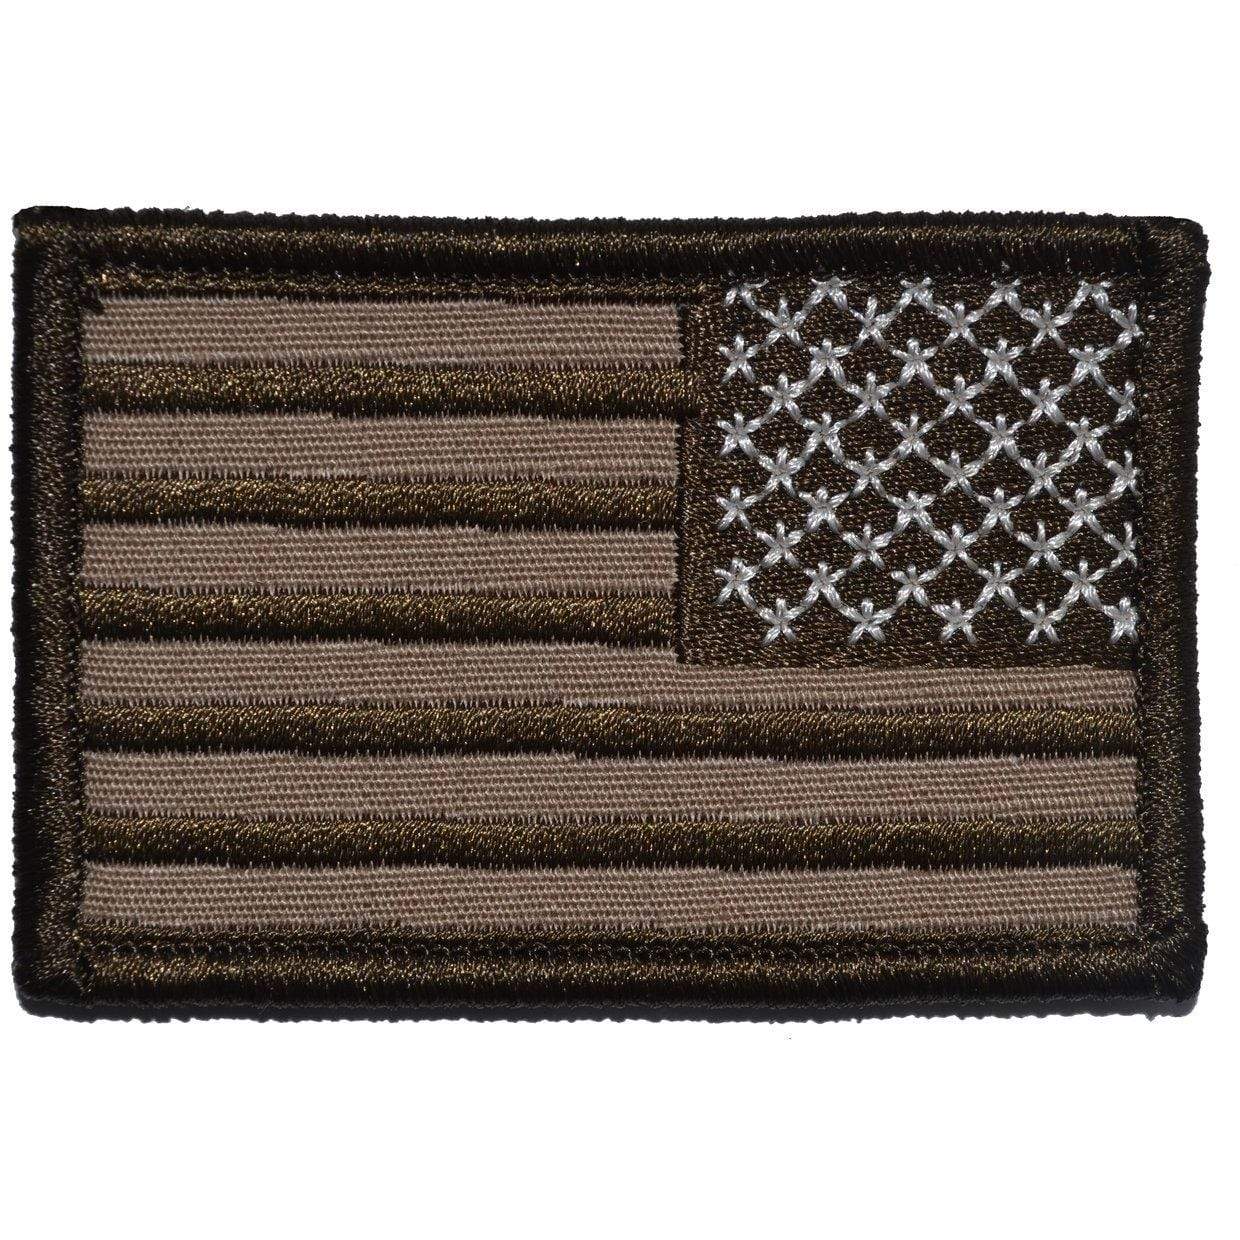 Tactical Gear Junkie Patches Right Face (Reverse) Coyote Brown US Flag - 2x3 Patch